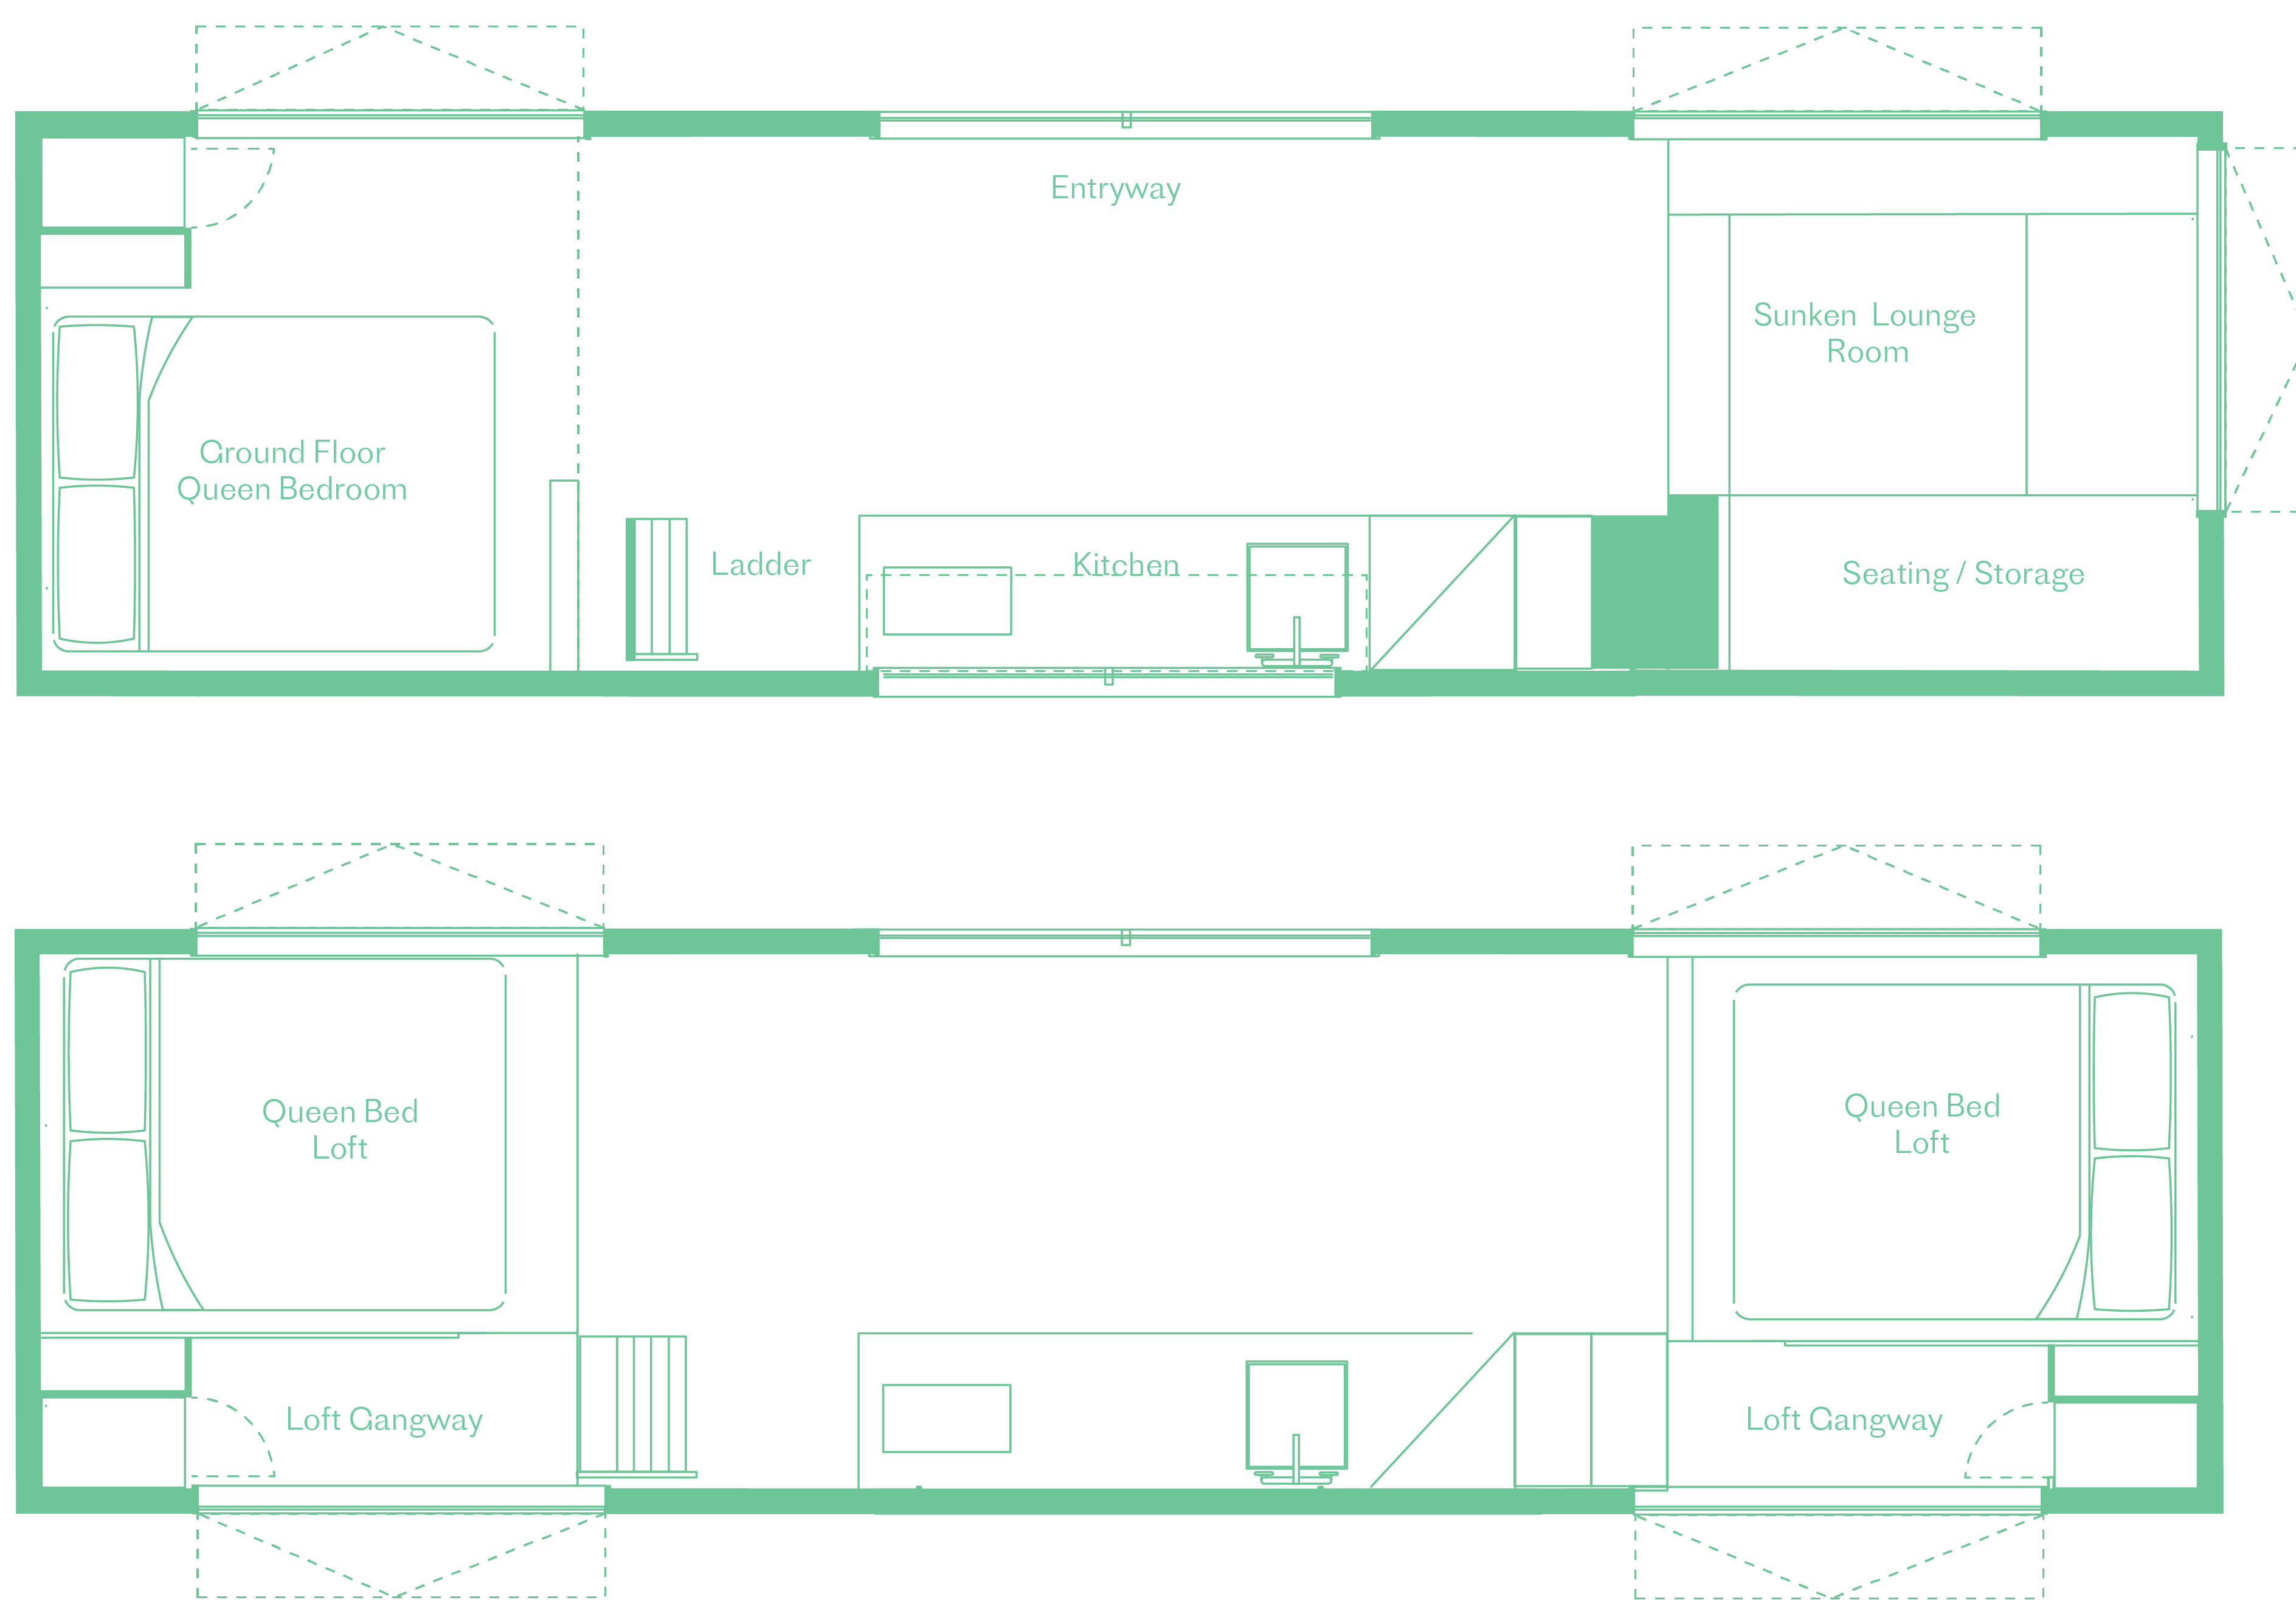 Floor plans for the Booderee 3 bed tiny home.